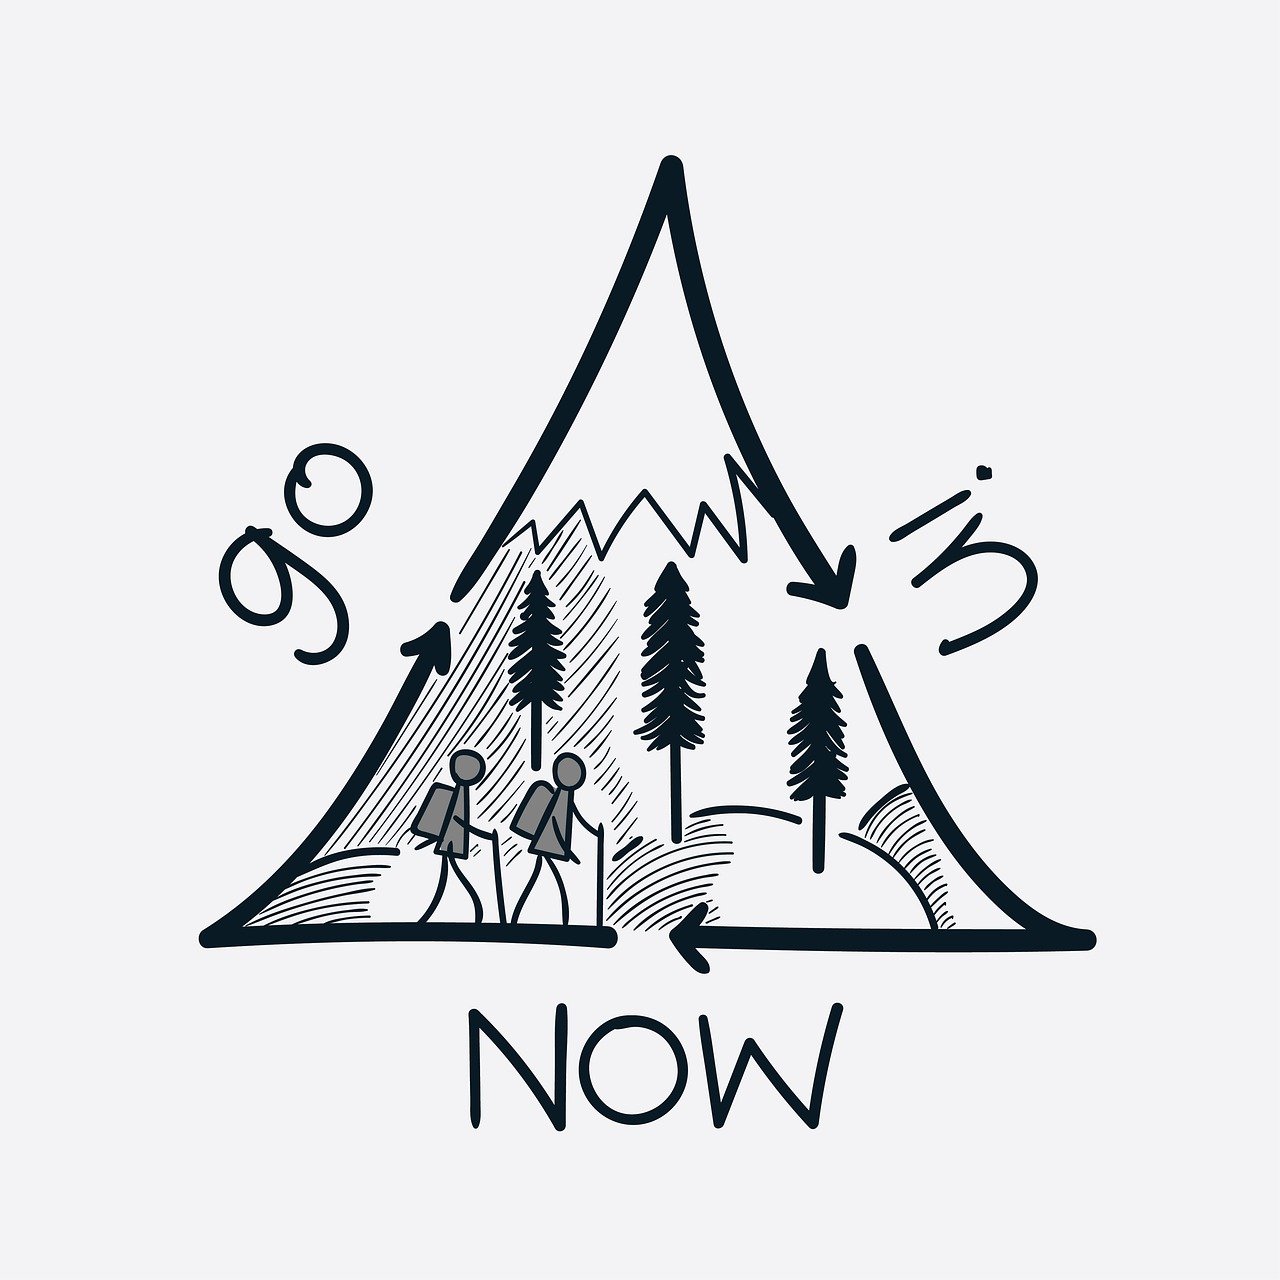 a couple of people standing in front of a mountain, concept art, graffiti, minimalist logo vector art, countdown, now, solo hiking in mountains trees